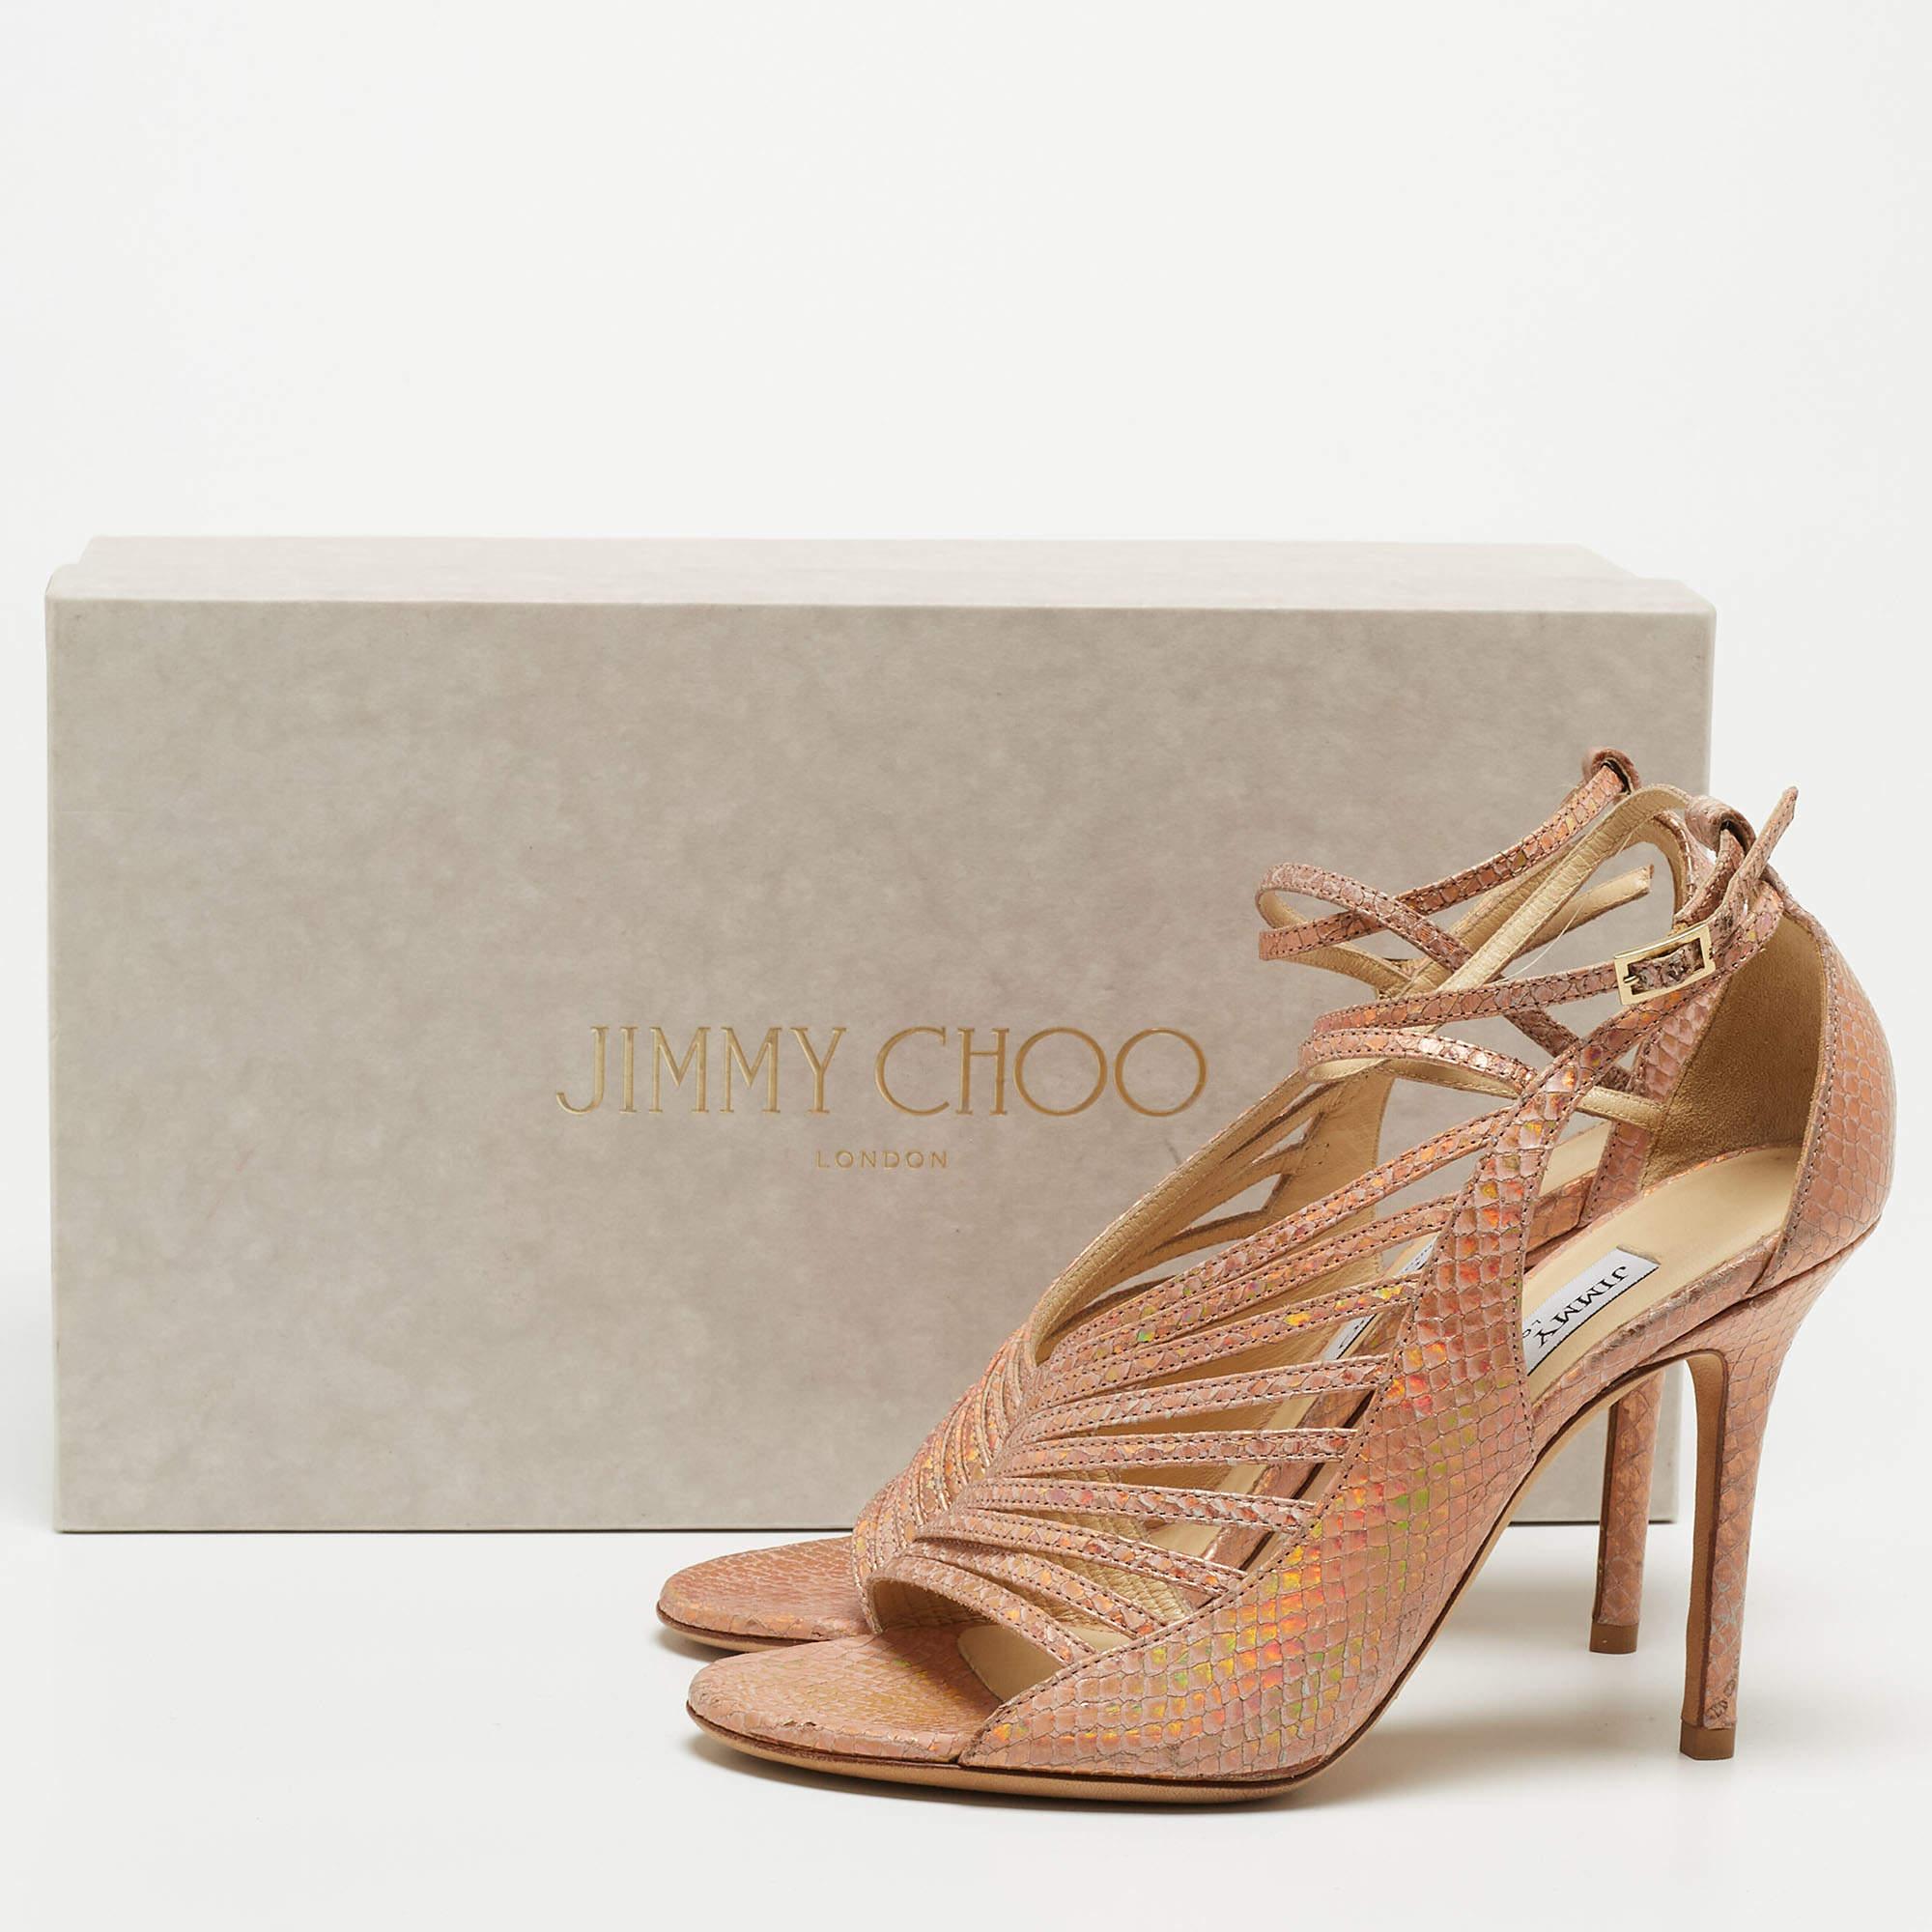 Jimmy Choo Metallic Pink Embossed Leather Strappy Open Toe Ankle Strap Sandals S 4